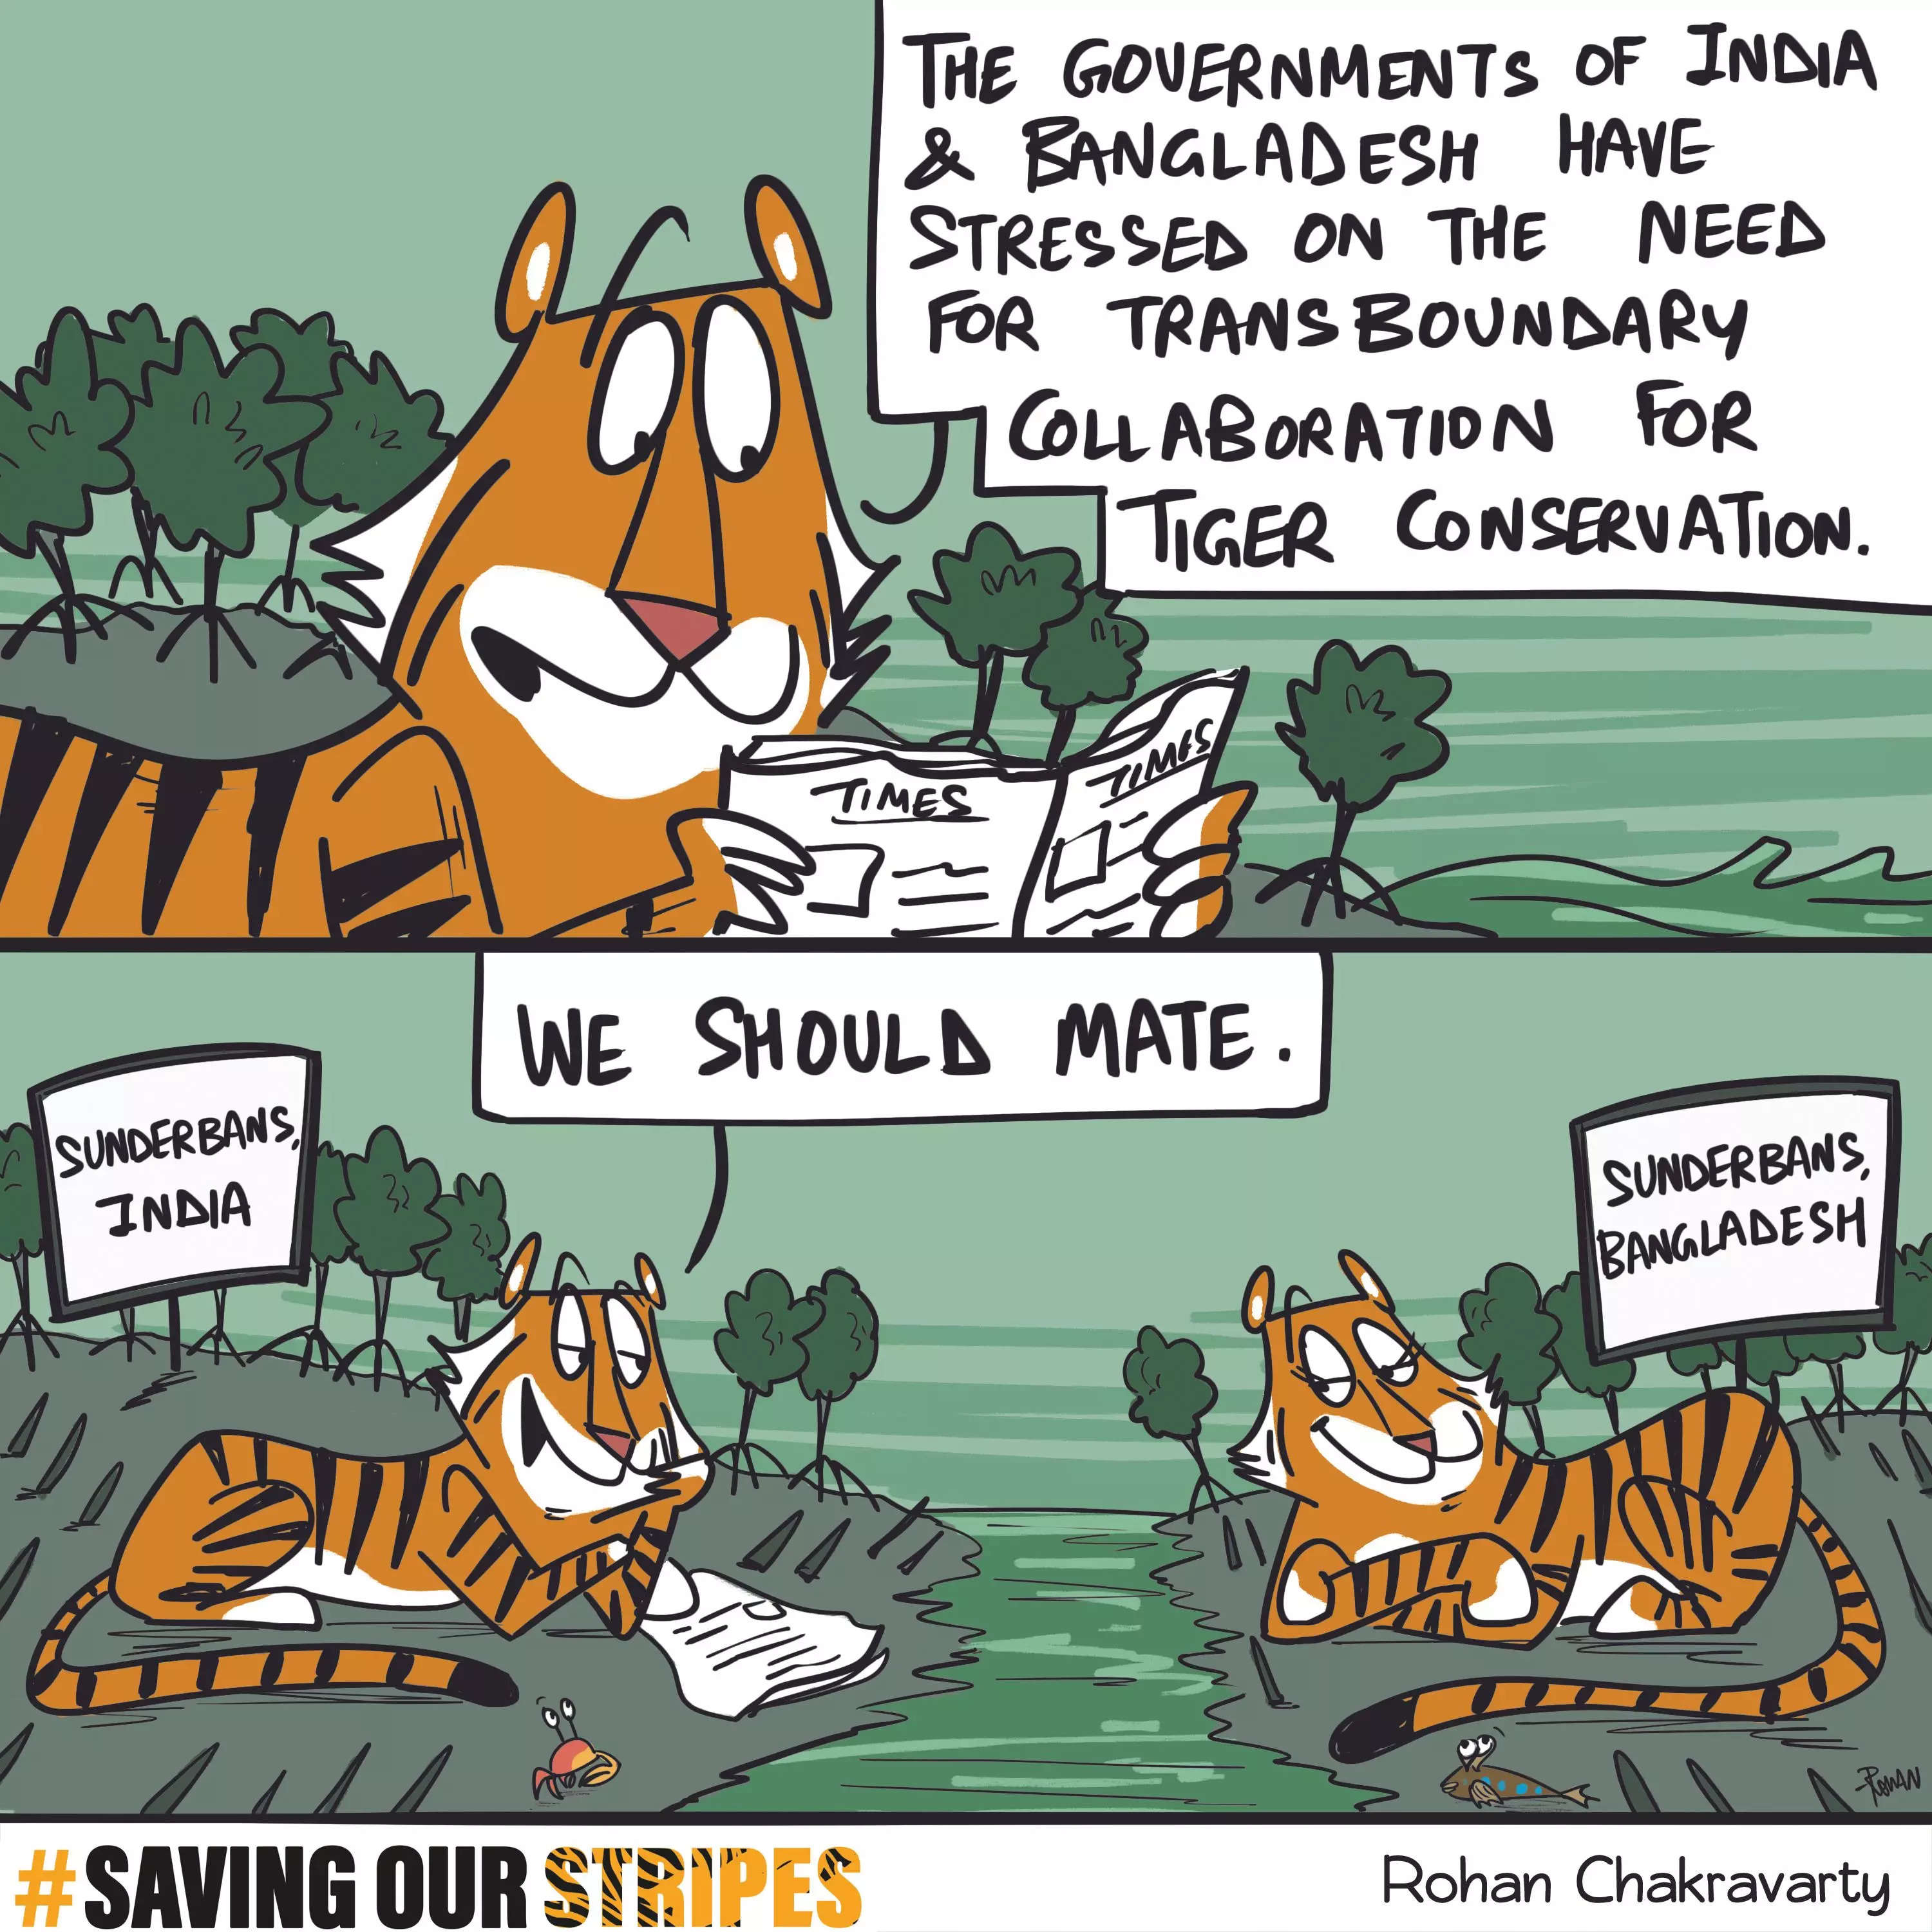 Breaking news: tigers from India and Bangladesh call for transboundary collaboration, aka it's time to swipe right!